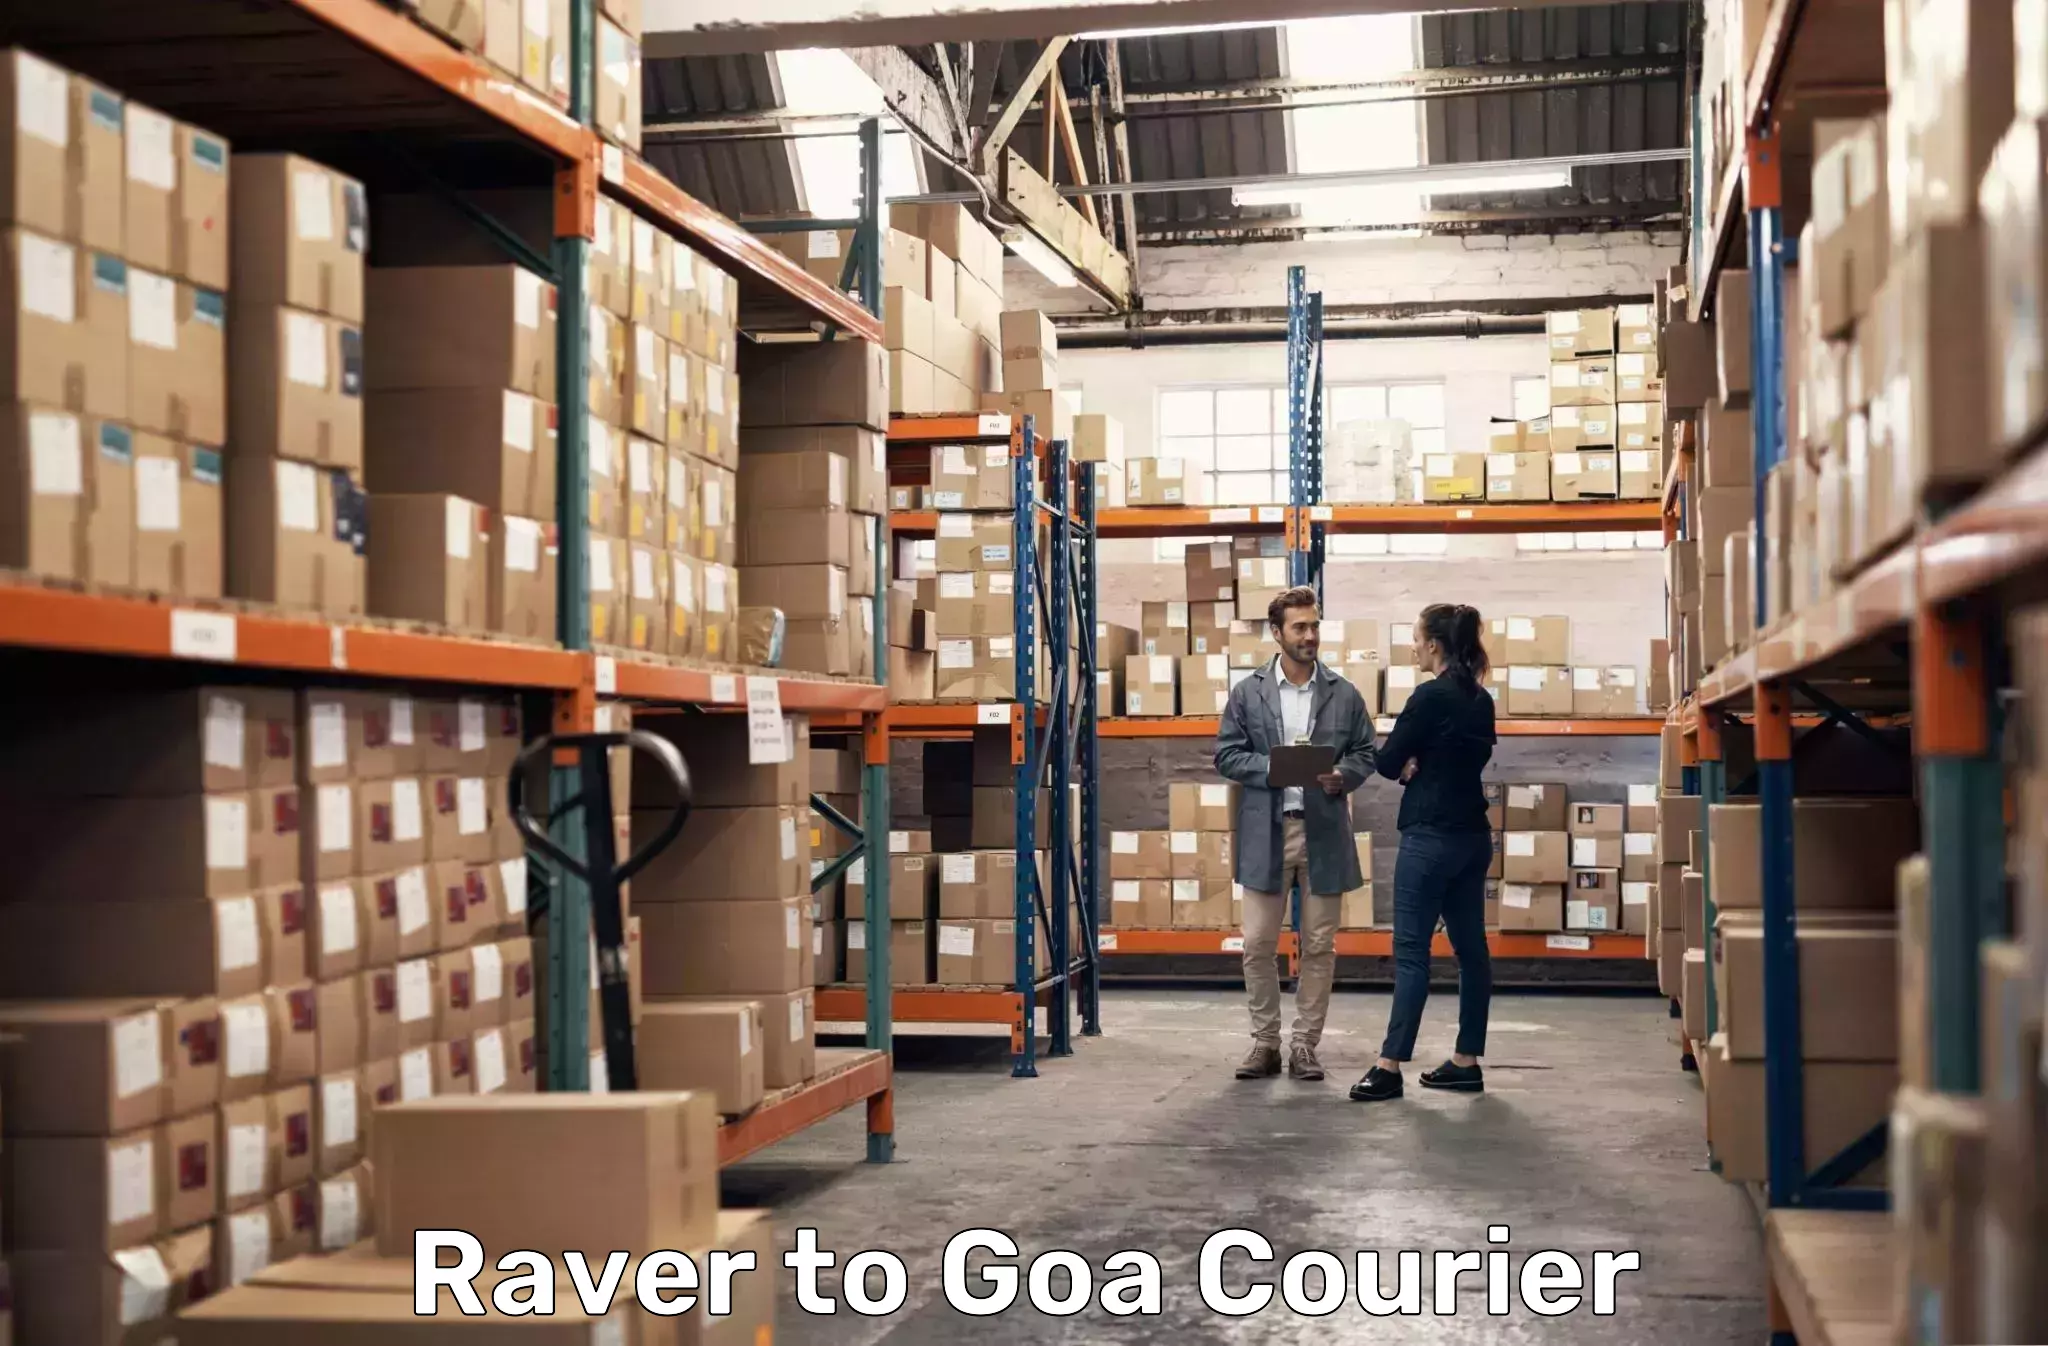 Cash on delivery service Raver to Goa